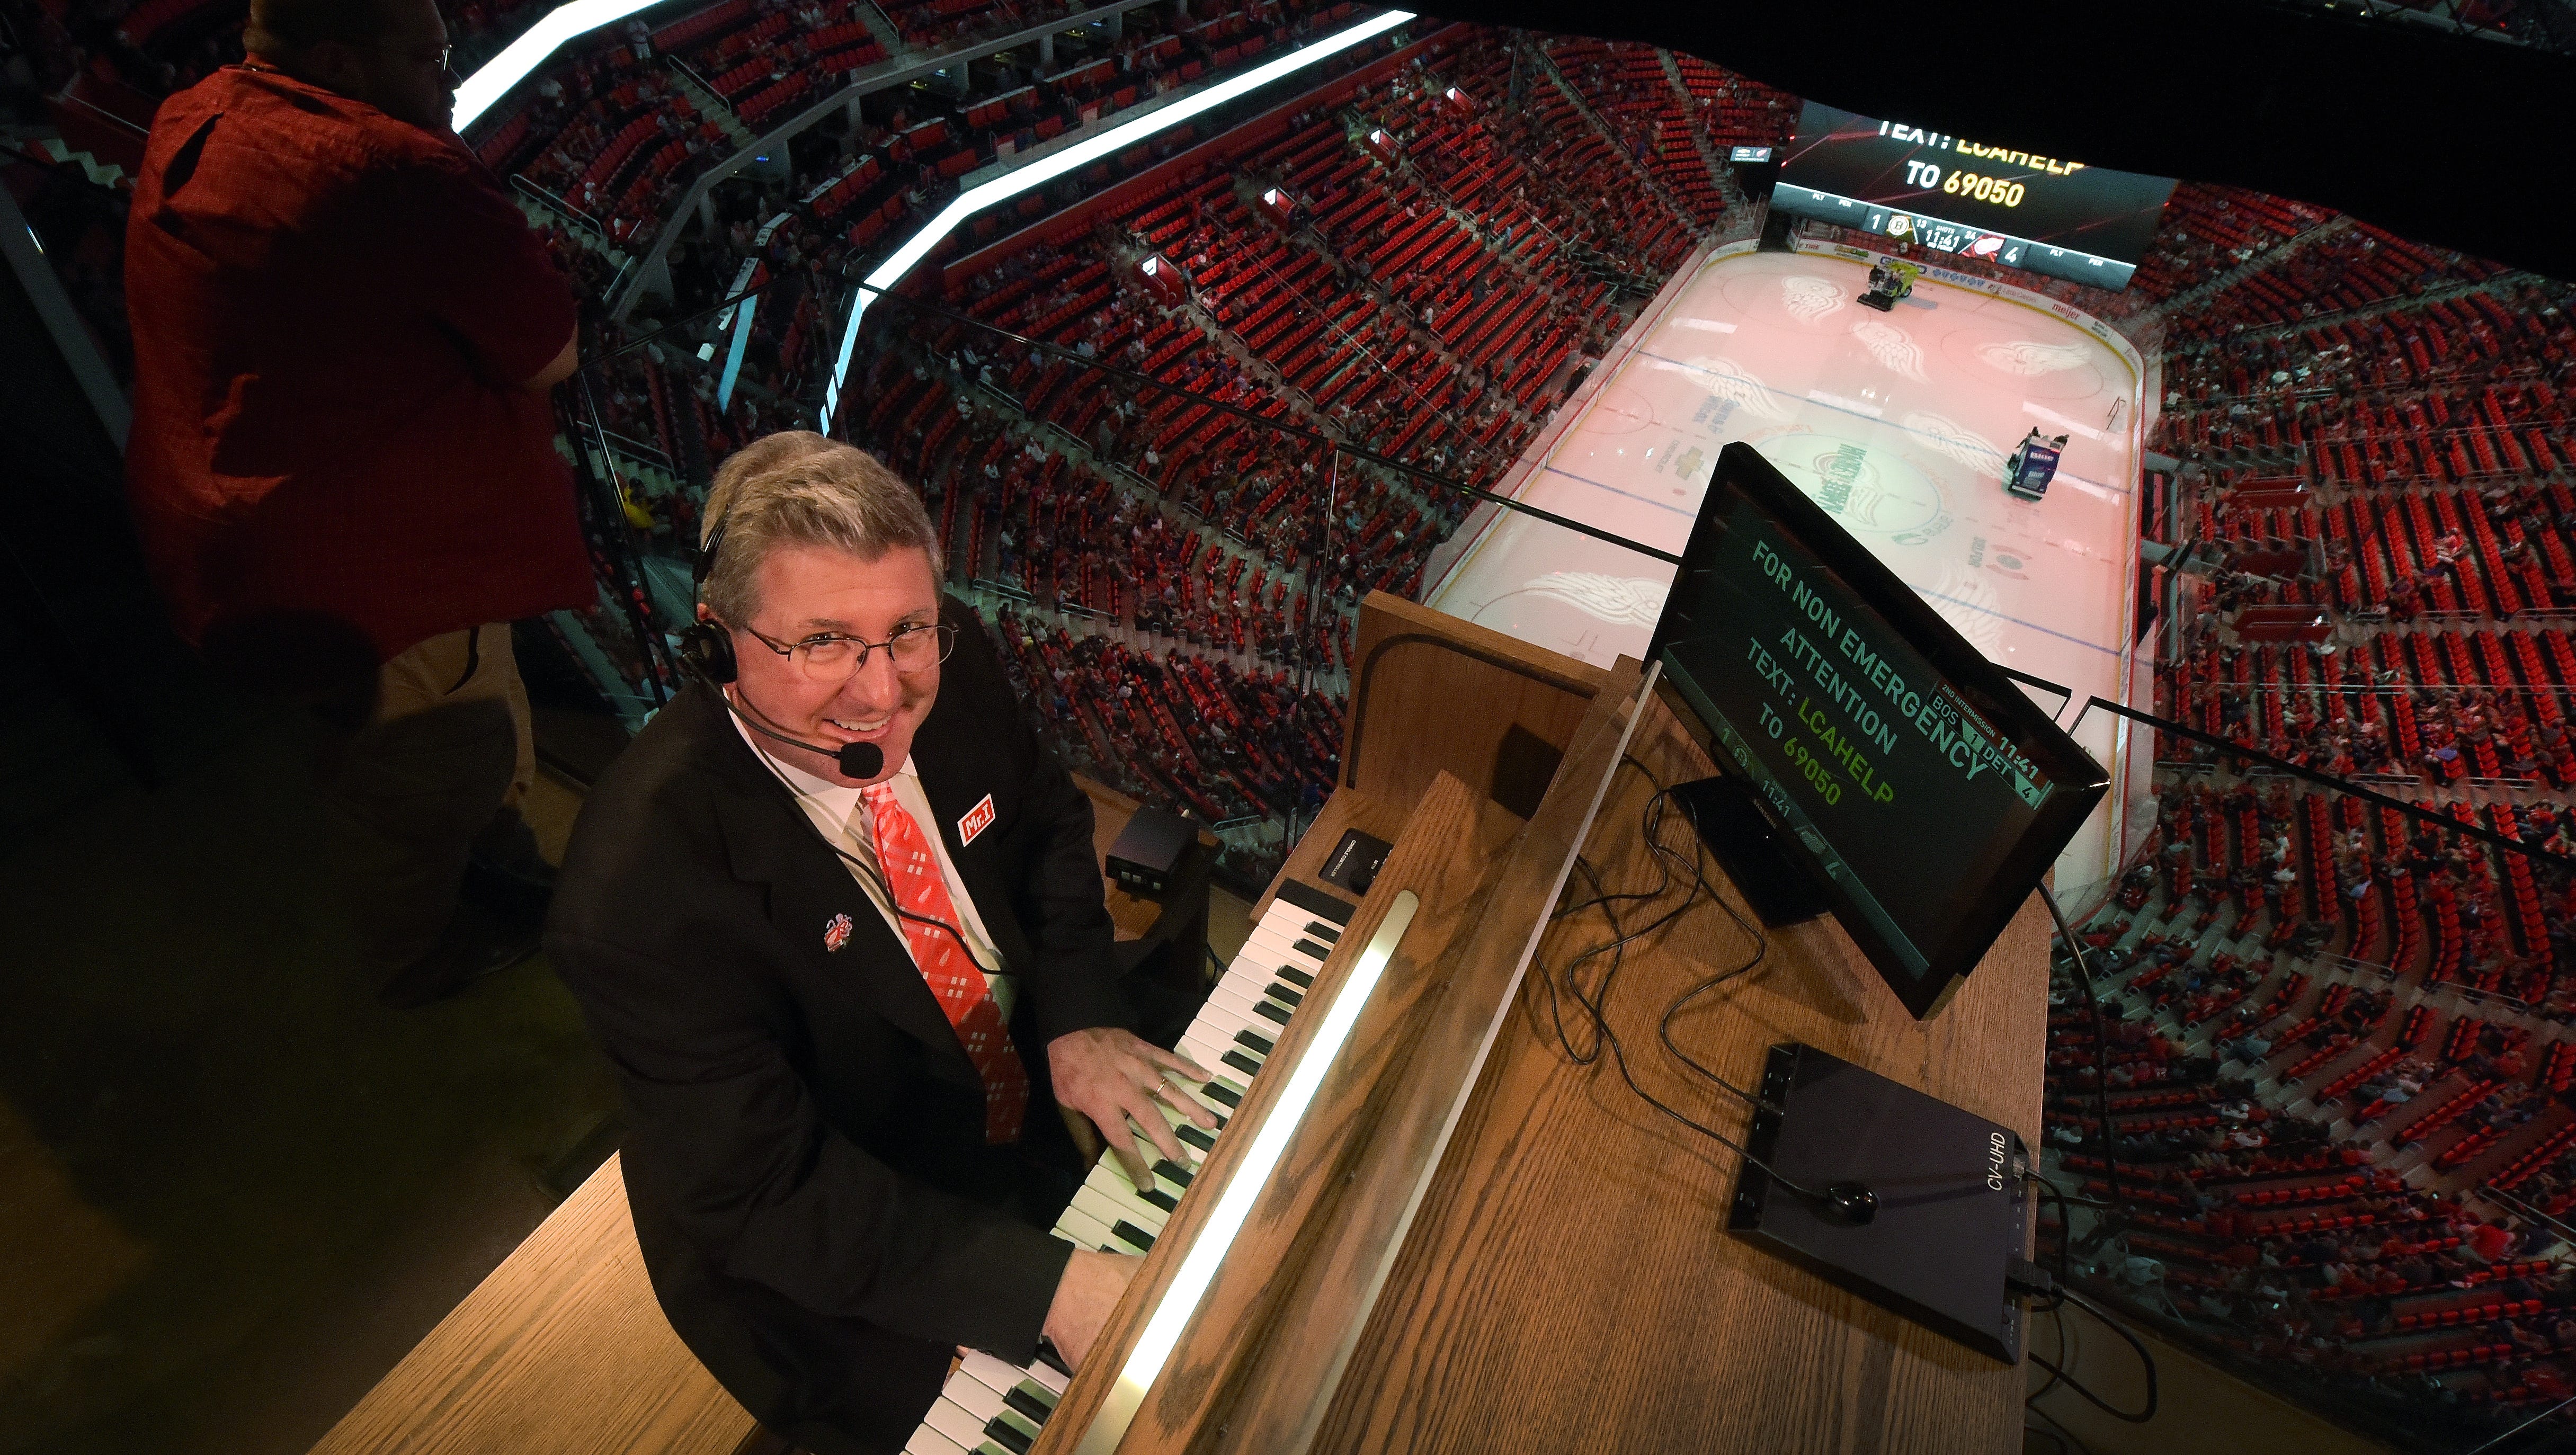 Theatre Organist Lance Luce performs from atop of Little Caesars Arena to the delight of the crowd.